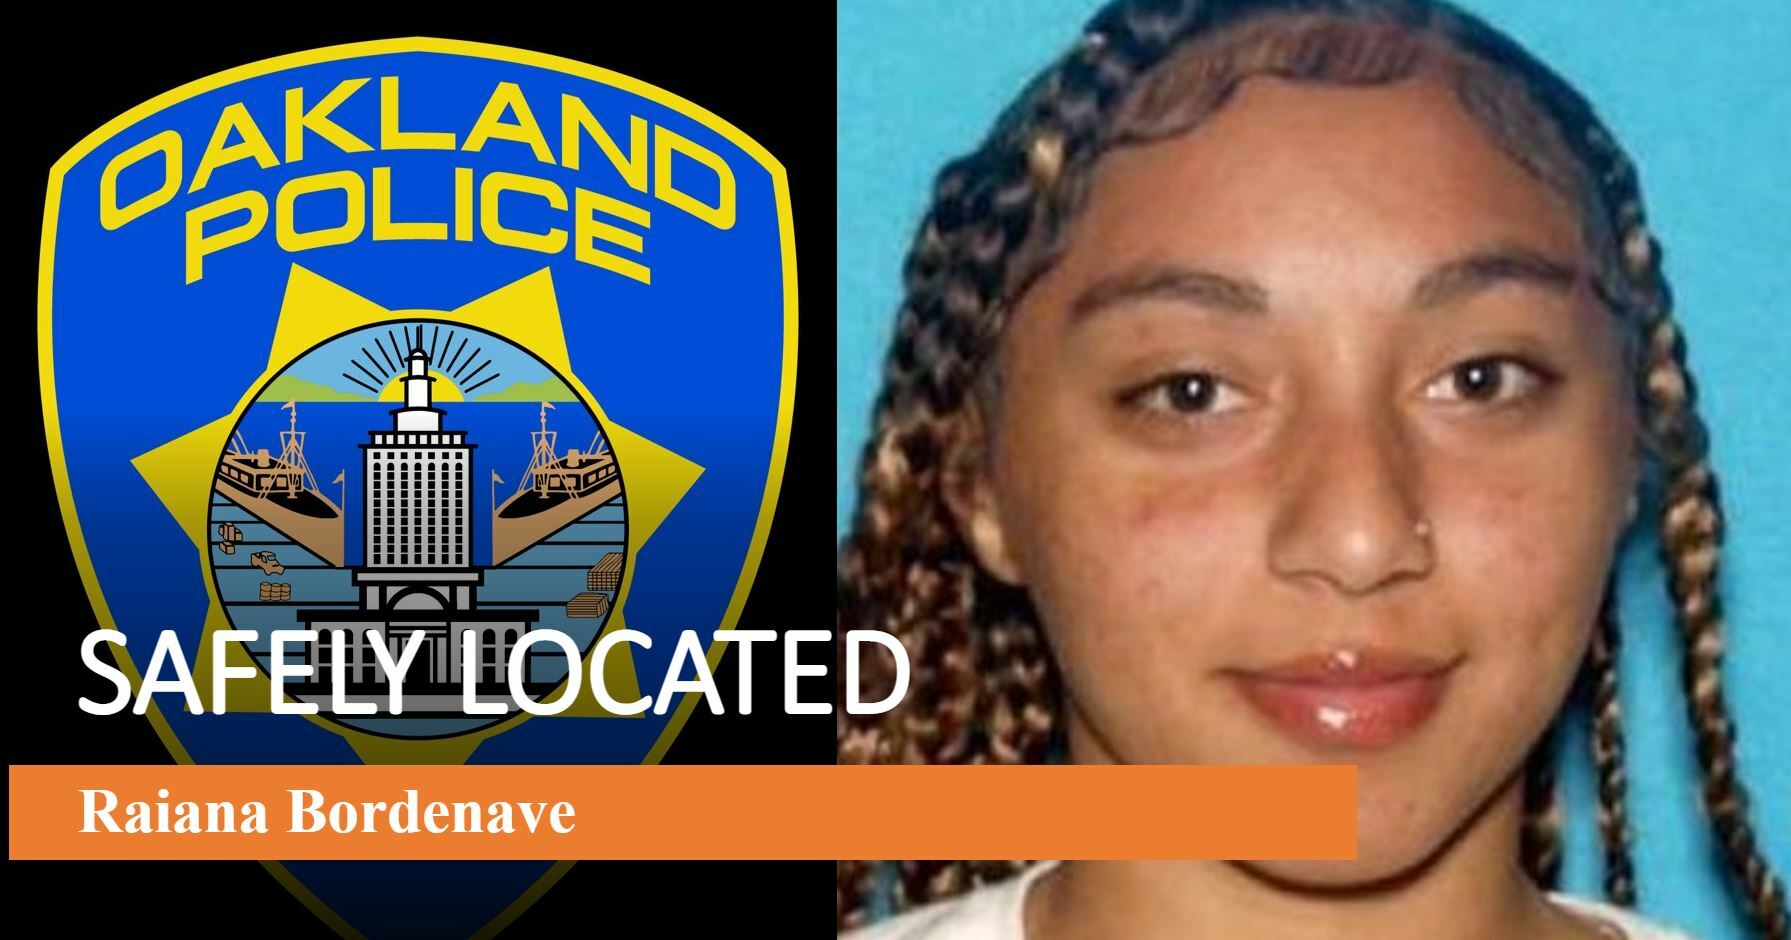 Photo of Raiana Bordenave who has been safely located